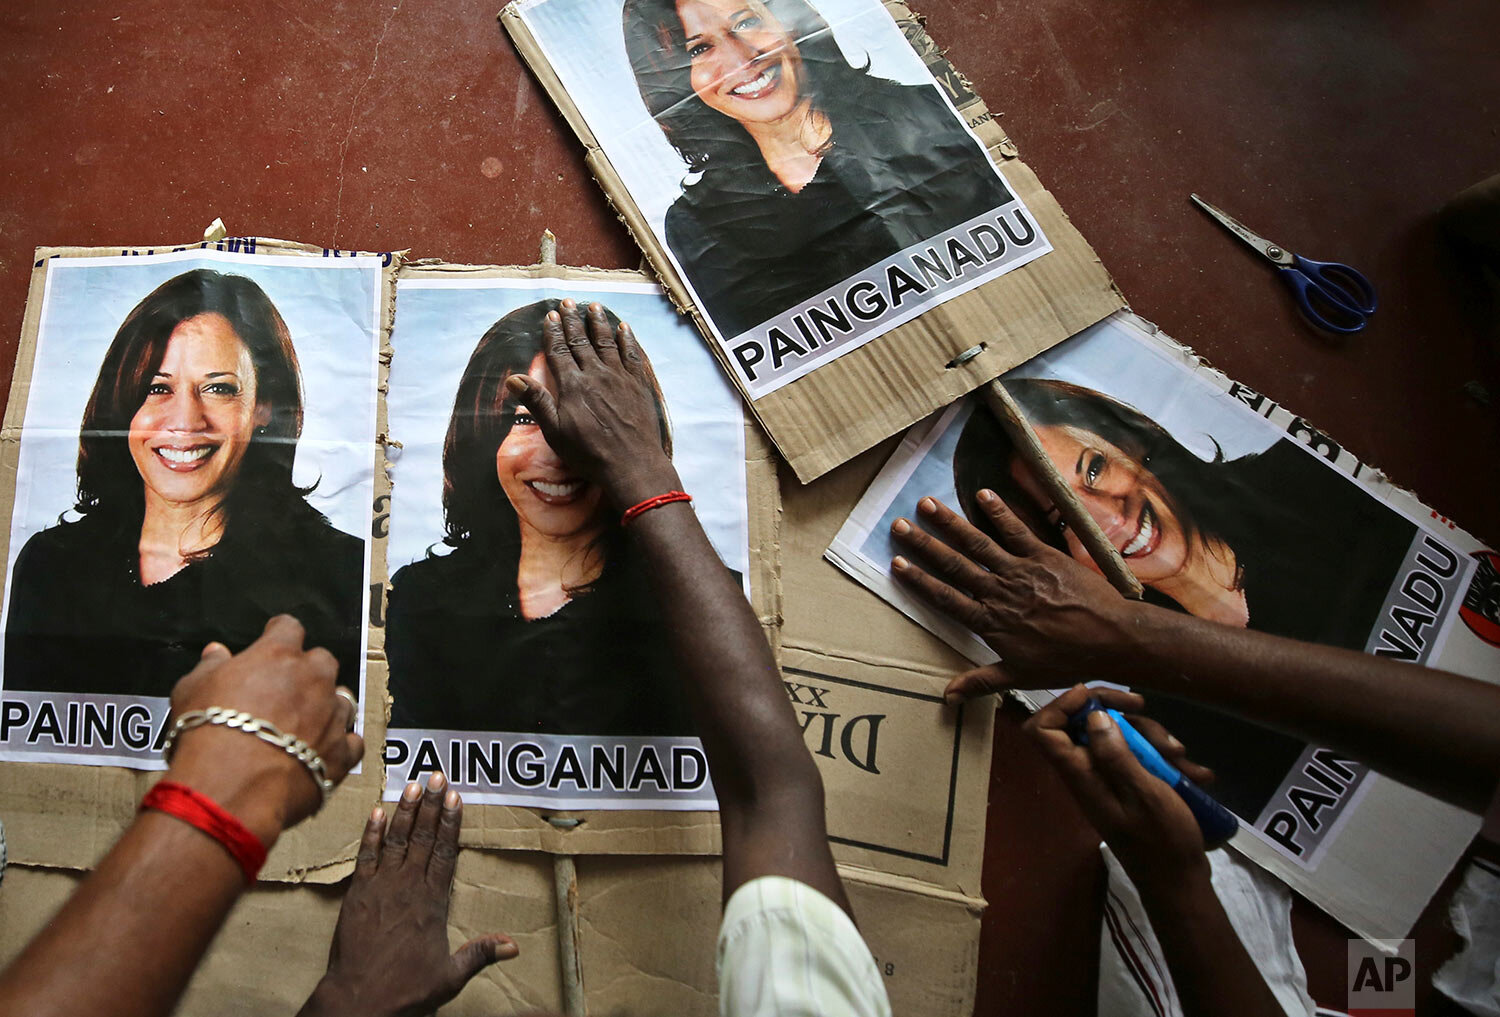  Villagers prepare placards featuring U.S. democratic vice presidential candidate Sen. Kamala Harris, as they prepare to celebrate should the Democratic Party win the presidential elections, in Painganadu a neighboring village of Thulasendrapuram, so